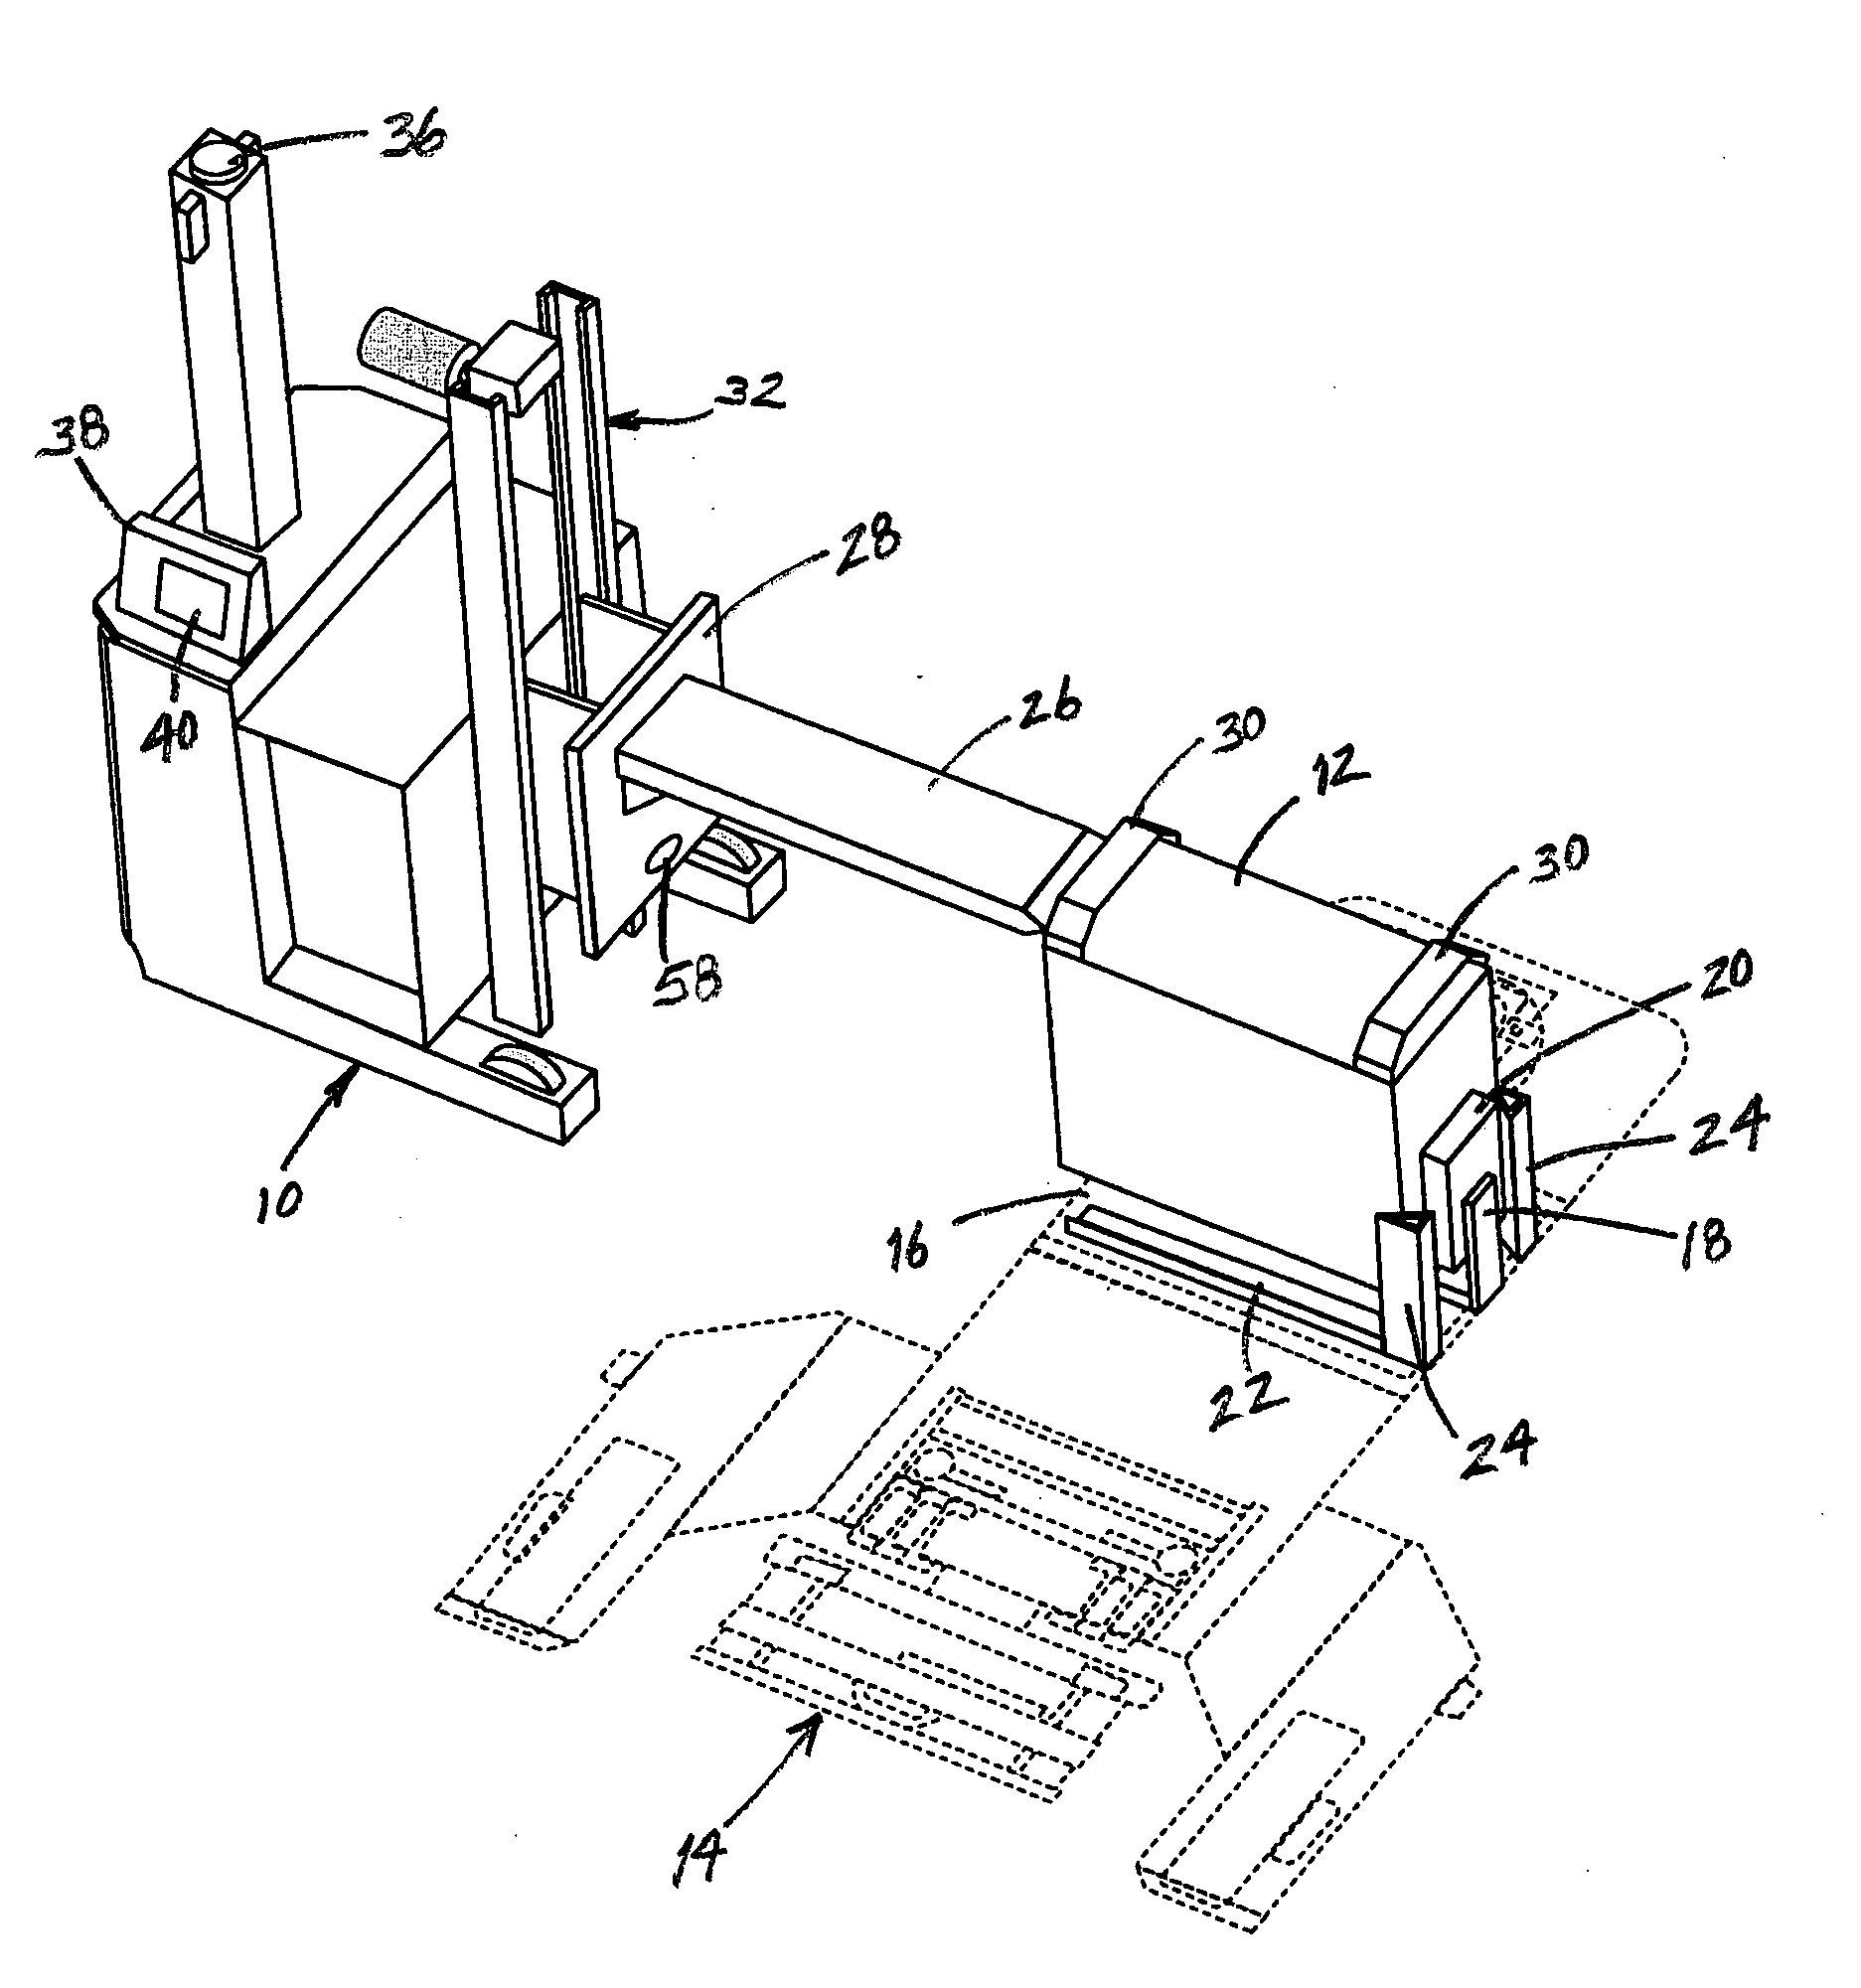 Automatic battery exchange system for mobile vehicles